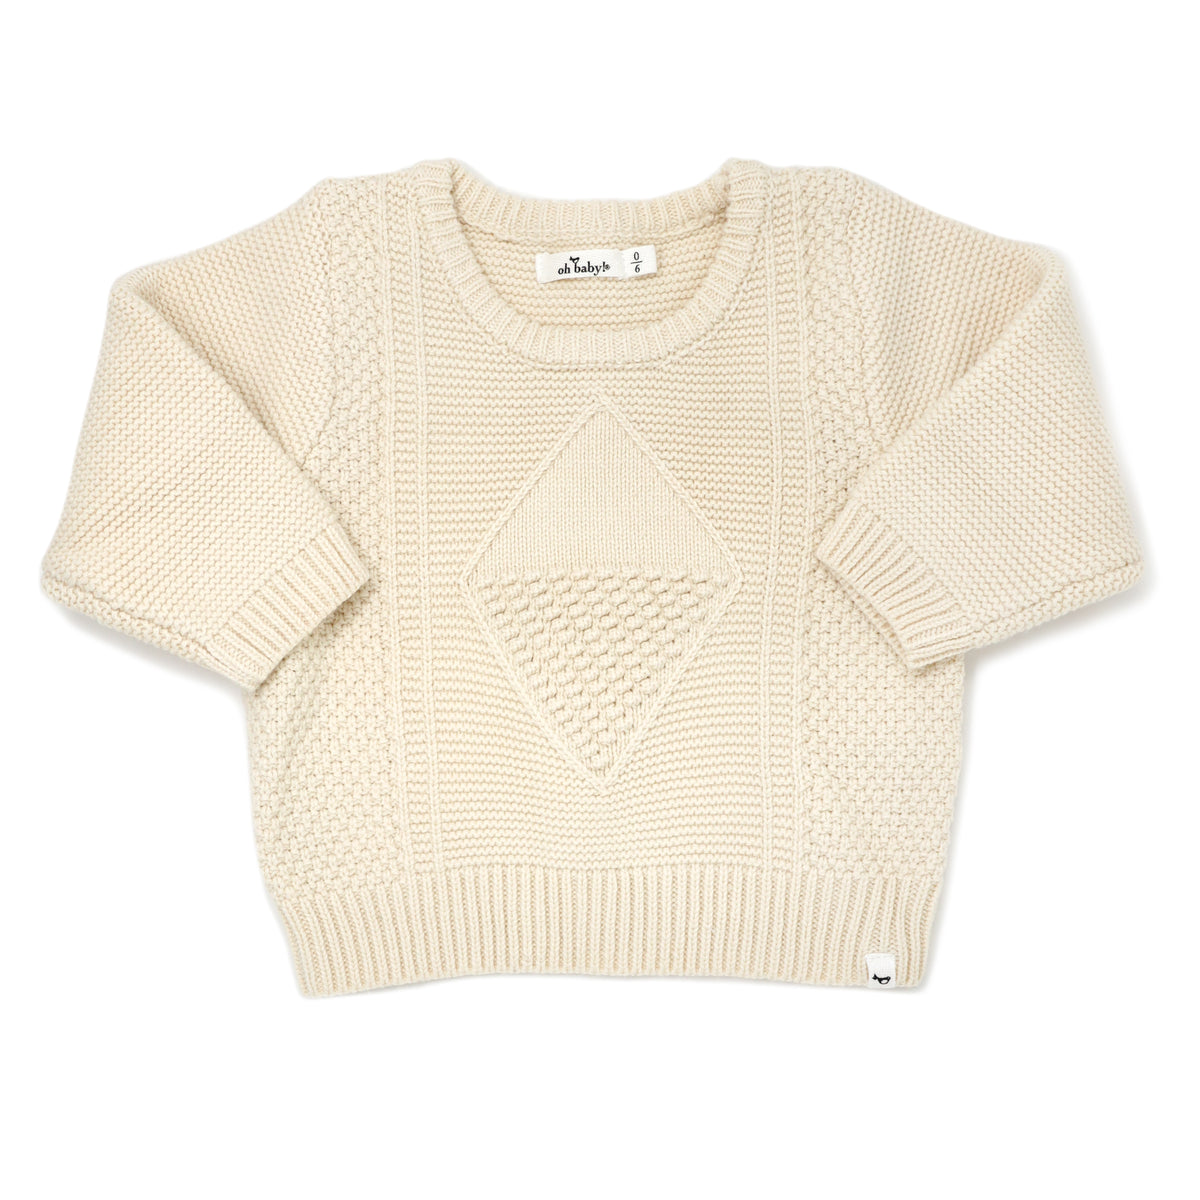 oh baby! Knitted Basket Sweater - Natural